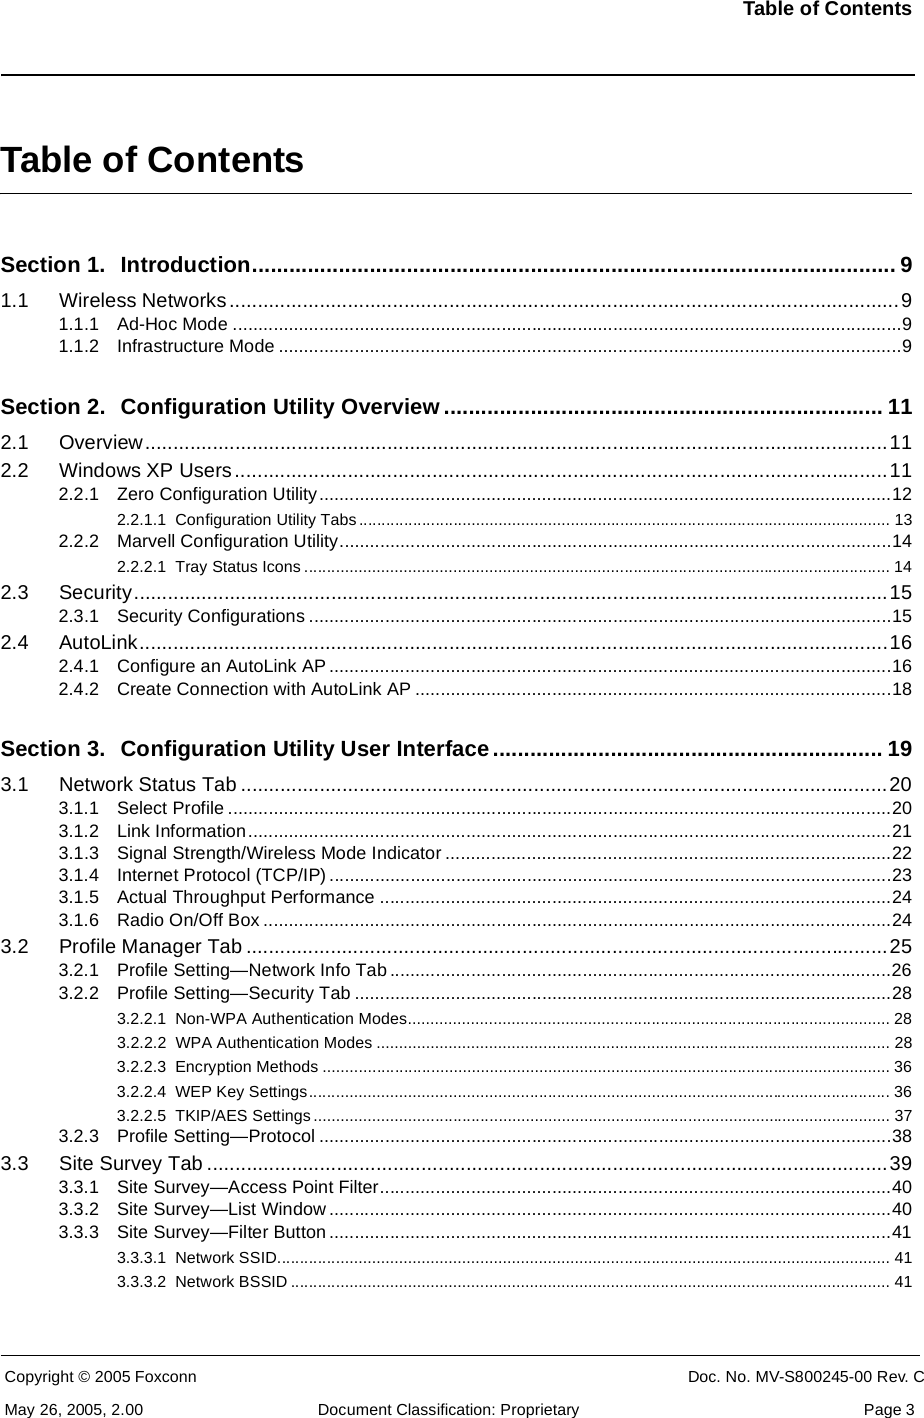 Table of ContentsCopyright © 2005 Foxconn CONFIDENTIAL Doc. No. MV-S800245-00 Rev. CMay 26, 2005, 2.00 Document Classification: Proprietary  Page 3Table of ContentsSection 1. Introduction........................................................................................................ 91.1 Wireless Networks.......................................................................................................................91.1.1 Ad-Hoc Mode ....................................................................................................................................91.1.2 Infrastructure Mode ...........................................................................................................................9Section 2. Configuration Utility Overview ....................................................................... 112.1 Overview....................................................................................................................................112.2 Windows XP Users....................................................................................................................112.2.1 Zero Configuration Utility.................................................................................................................122.2.1.1 Configuration Utility Tabs ...................................................................................................................... 132.2.2 Marvell Configuration Utility.............................................................................................................142.2.2.1 Tray Status Icons .................................................................................................................................. 142.3 Security......................................................................................................................................152.3.1 Security Configurations ...................................................................................................................152.4 AutoLink.....................................................................................................................................162.4.1 Configure an AutoLink AP ...............................................................................................................162.4.2 Create Connection with AutoLink AP ..............................................................................................18Section 3. Configuration Utility User Interface............................................................... 193.1 Network Status Tab ...................................................................................................................203.1.1 Select Profile ...................................................................................................................................203.1.2 Link Information...............................................................................................................................213.1.3 Signal Strength/Wireless Mode Indicator ........................................................................................223.1.4 Internet Protocol (TCP/IP) ...............................................................................................................233.1.5 Actual Throughput Performance .....................................................................................................243.1.6 Radio On/Off Box ............................................................................................................................243.2 Profile Manager Tab ..................................................................................................................253.2.1 Profile Setting—Network Info Tab ...................................................................................................263.2.2 Profile Setting—Security Tab ..........................................................................................................283.2.2.1 Non-WPA Authentication Modes........................................................................................................... 283.2.2.2 WPA Authentication Modes .................................................................................................................. 283.2.2.3 Encryption Methods .............................................................................................................................. 363.2.2.4 WEP Key Settings................................................................................................................................. 363.2.2.5 TKIP/AES Settings ................................................................................................................................ 373.2.3 Profile Setting—Protocol .................................................................................................................383.3 Site Survey Tab .........................................................................................................................393.3.1 Site Survey—Access Point Filter.....................................................................................................403.3.2 Site Survey—List Window ...............................................................................................................403.3.3 Site Survey—Filter Button ...............................................................................................................413.3.3.1 Network SSID........................................................................................................................................ 413.3.3.2 Network BSSID ..................................................................................................................................... 41